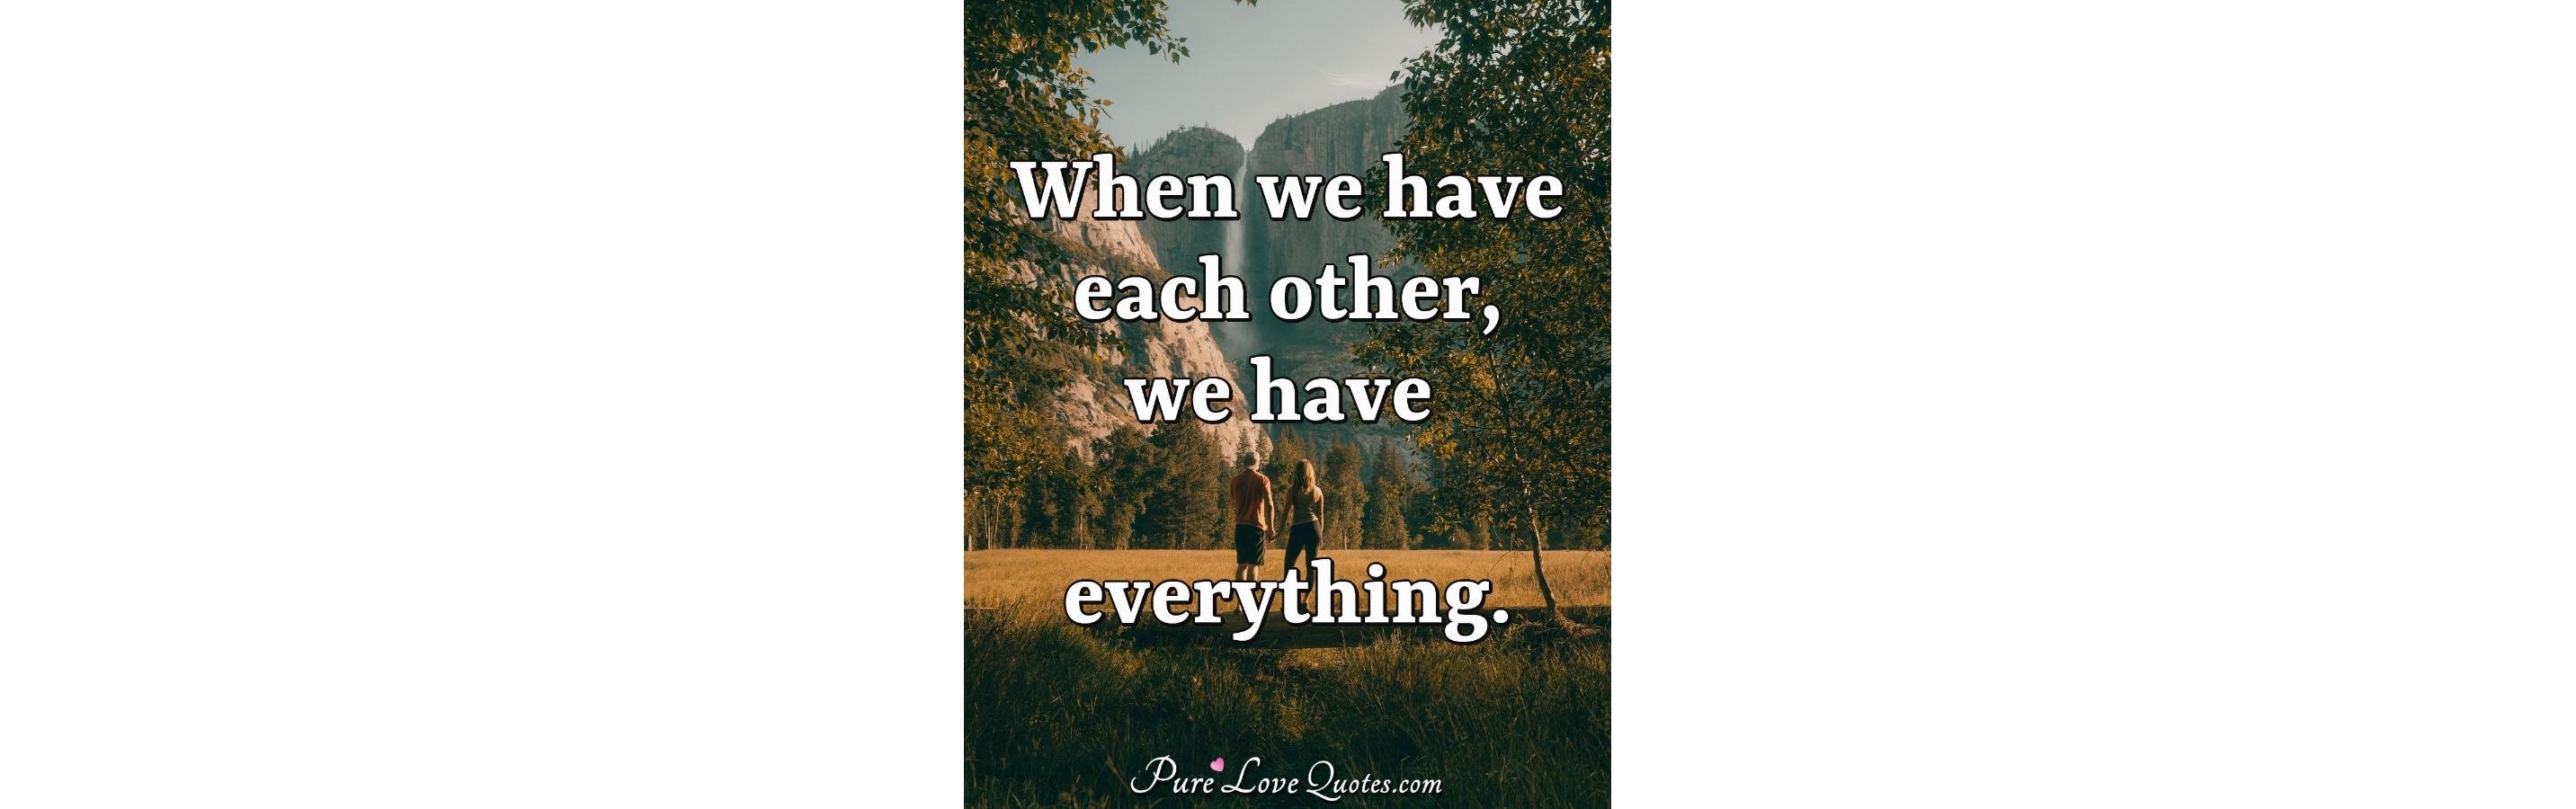 When we have each other, we have everything. | PureLoveQuotes